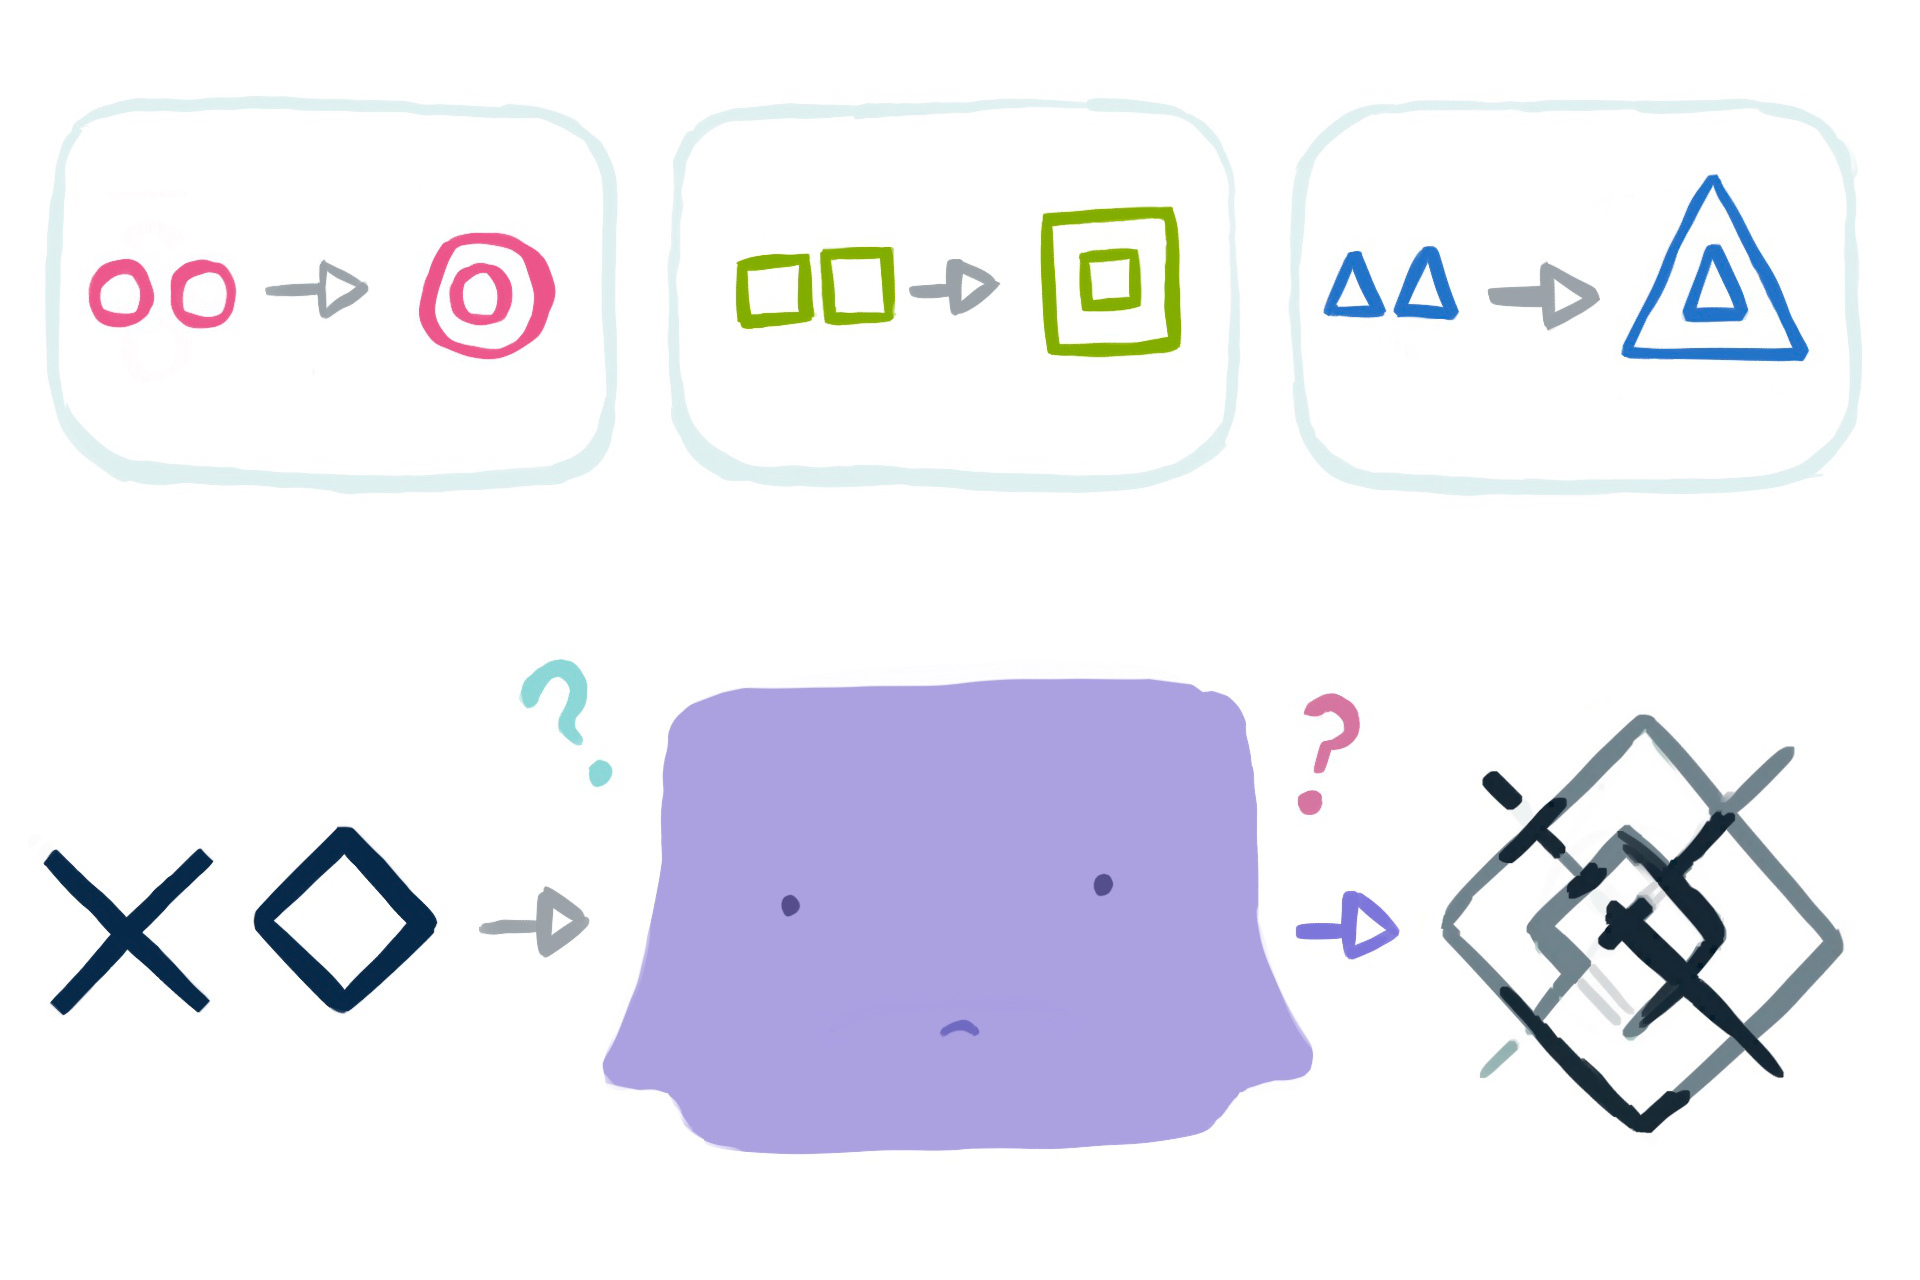 An illustration of Ditto confused by a test example that has no analogous training example. The visible training dataset shows pairs of images, where the input image always shows two identical shapes adjacent, and the output contains the two shapes overlaid at two scales, concentrically. In the test example, the input shapes are no longer identical, and Ditto cannot predict what the result should be. Ditto's confused prediction contains a glitchy mix of several possible hypotheses.